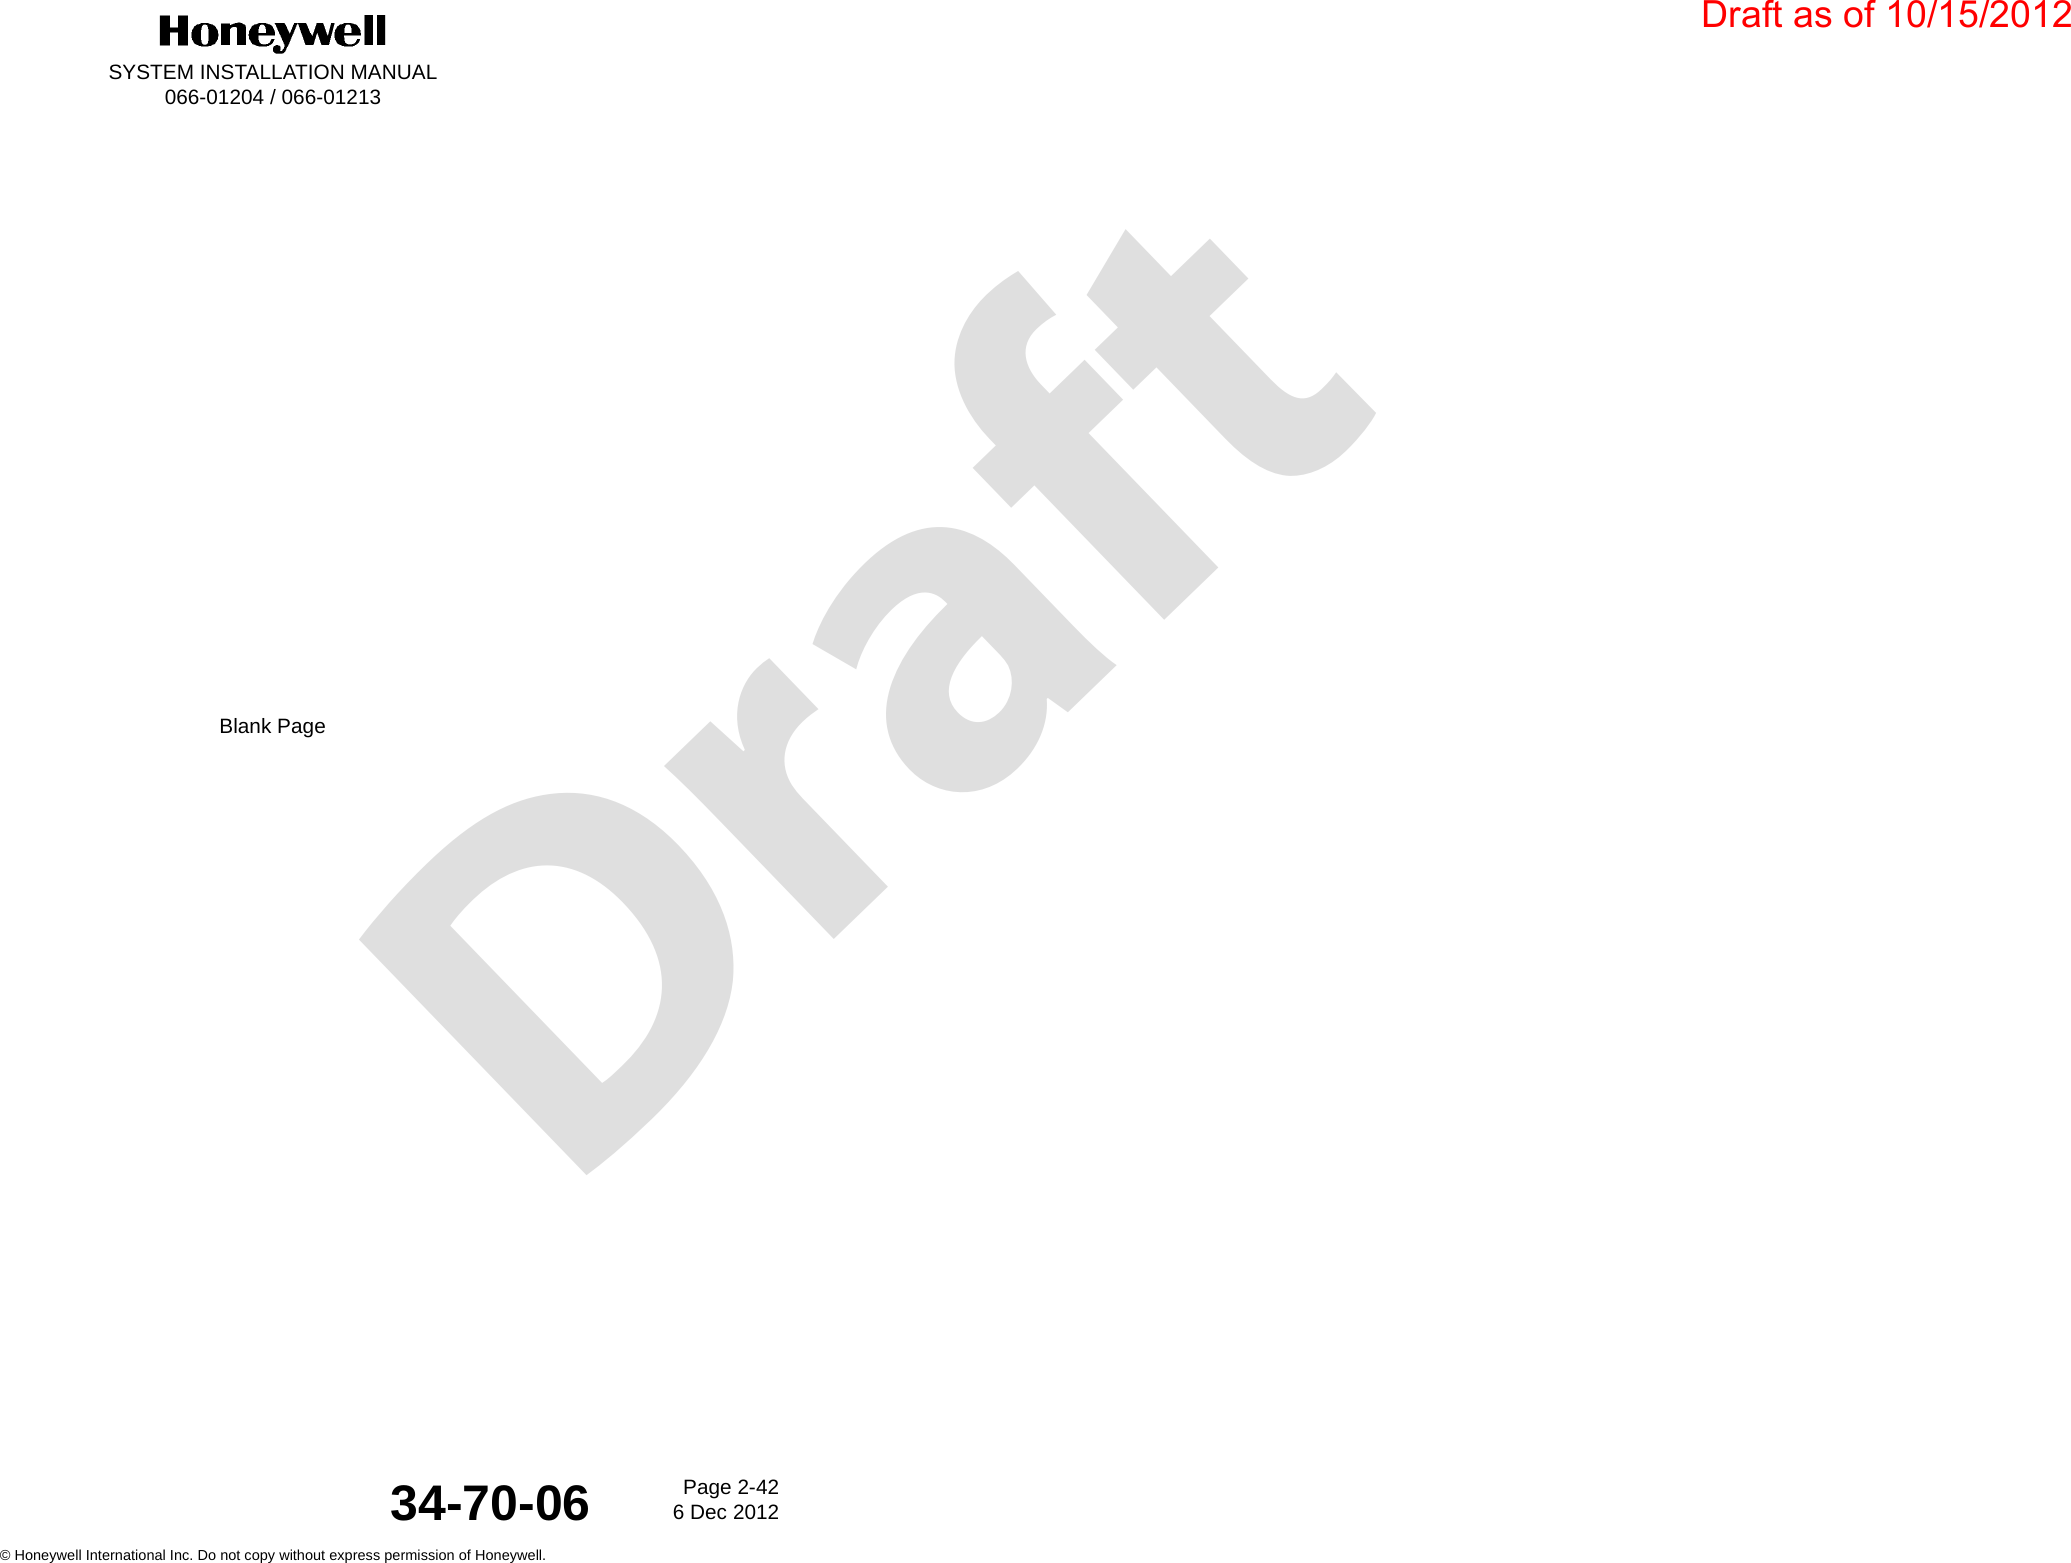 DraftSYSTEM INSTALLATION MANUAL066-01204 / 066-01213Page 2-426 Dec 2012© Honeywell International Inc. Do not copy without express permission of Honeywell.34-70-06Blank PageDraft as of 10/15/2012